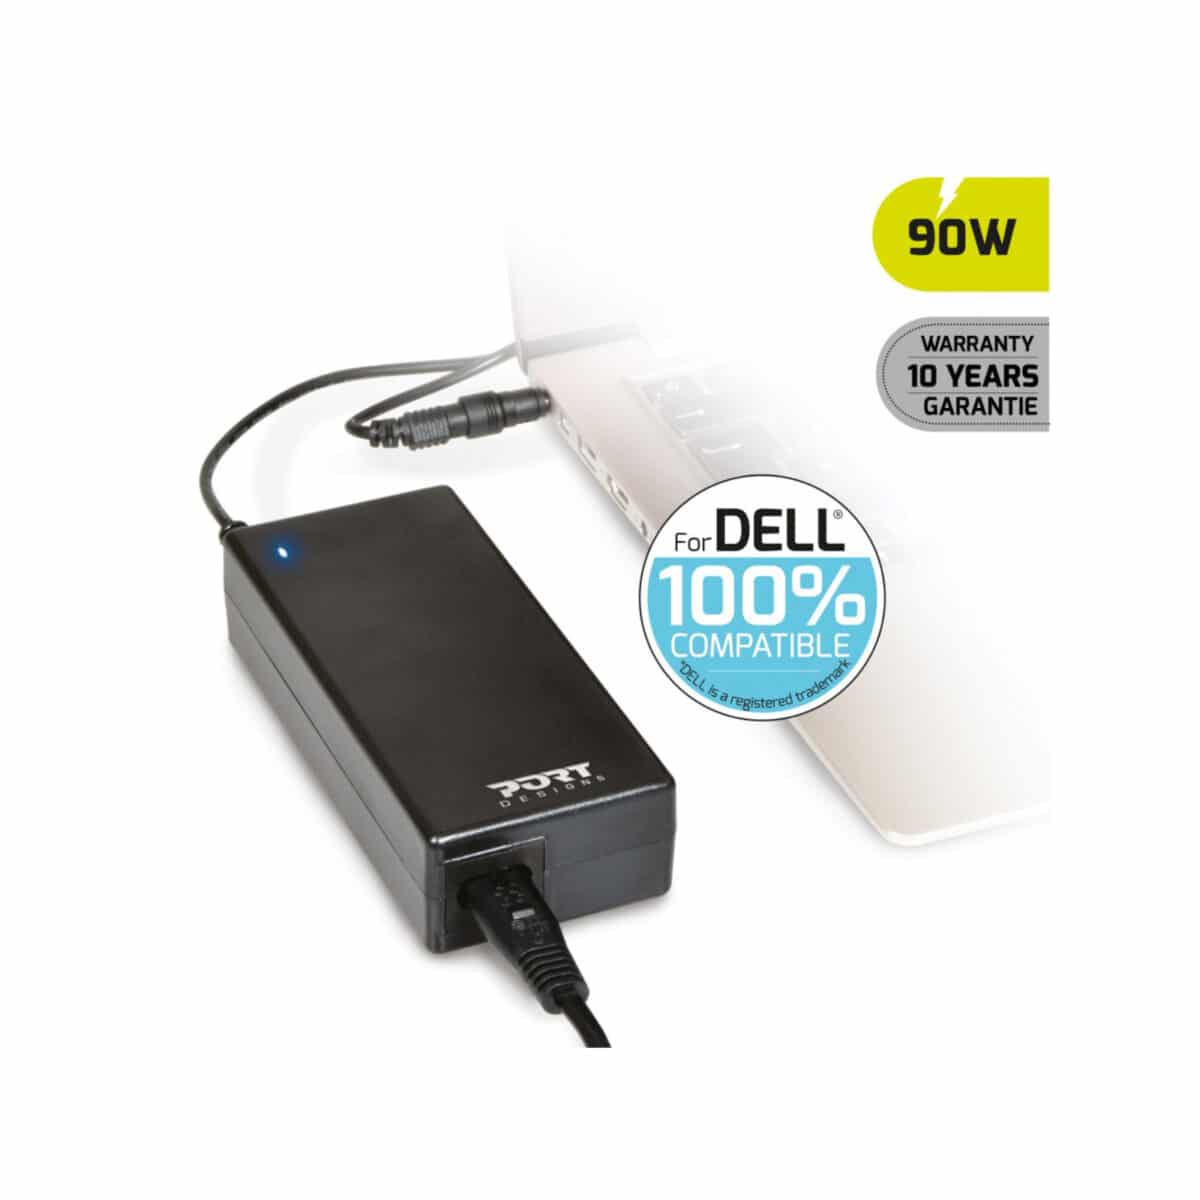 PORT PC ACCESSORIES 90W POWER SUPPLY FOR DELL - EU 10 YEAR CARRY IN WARRANTY